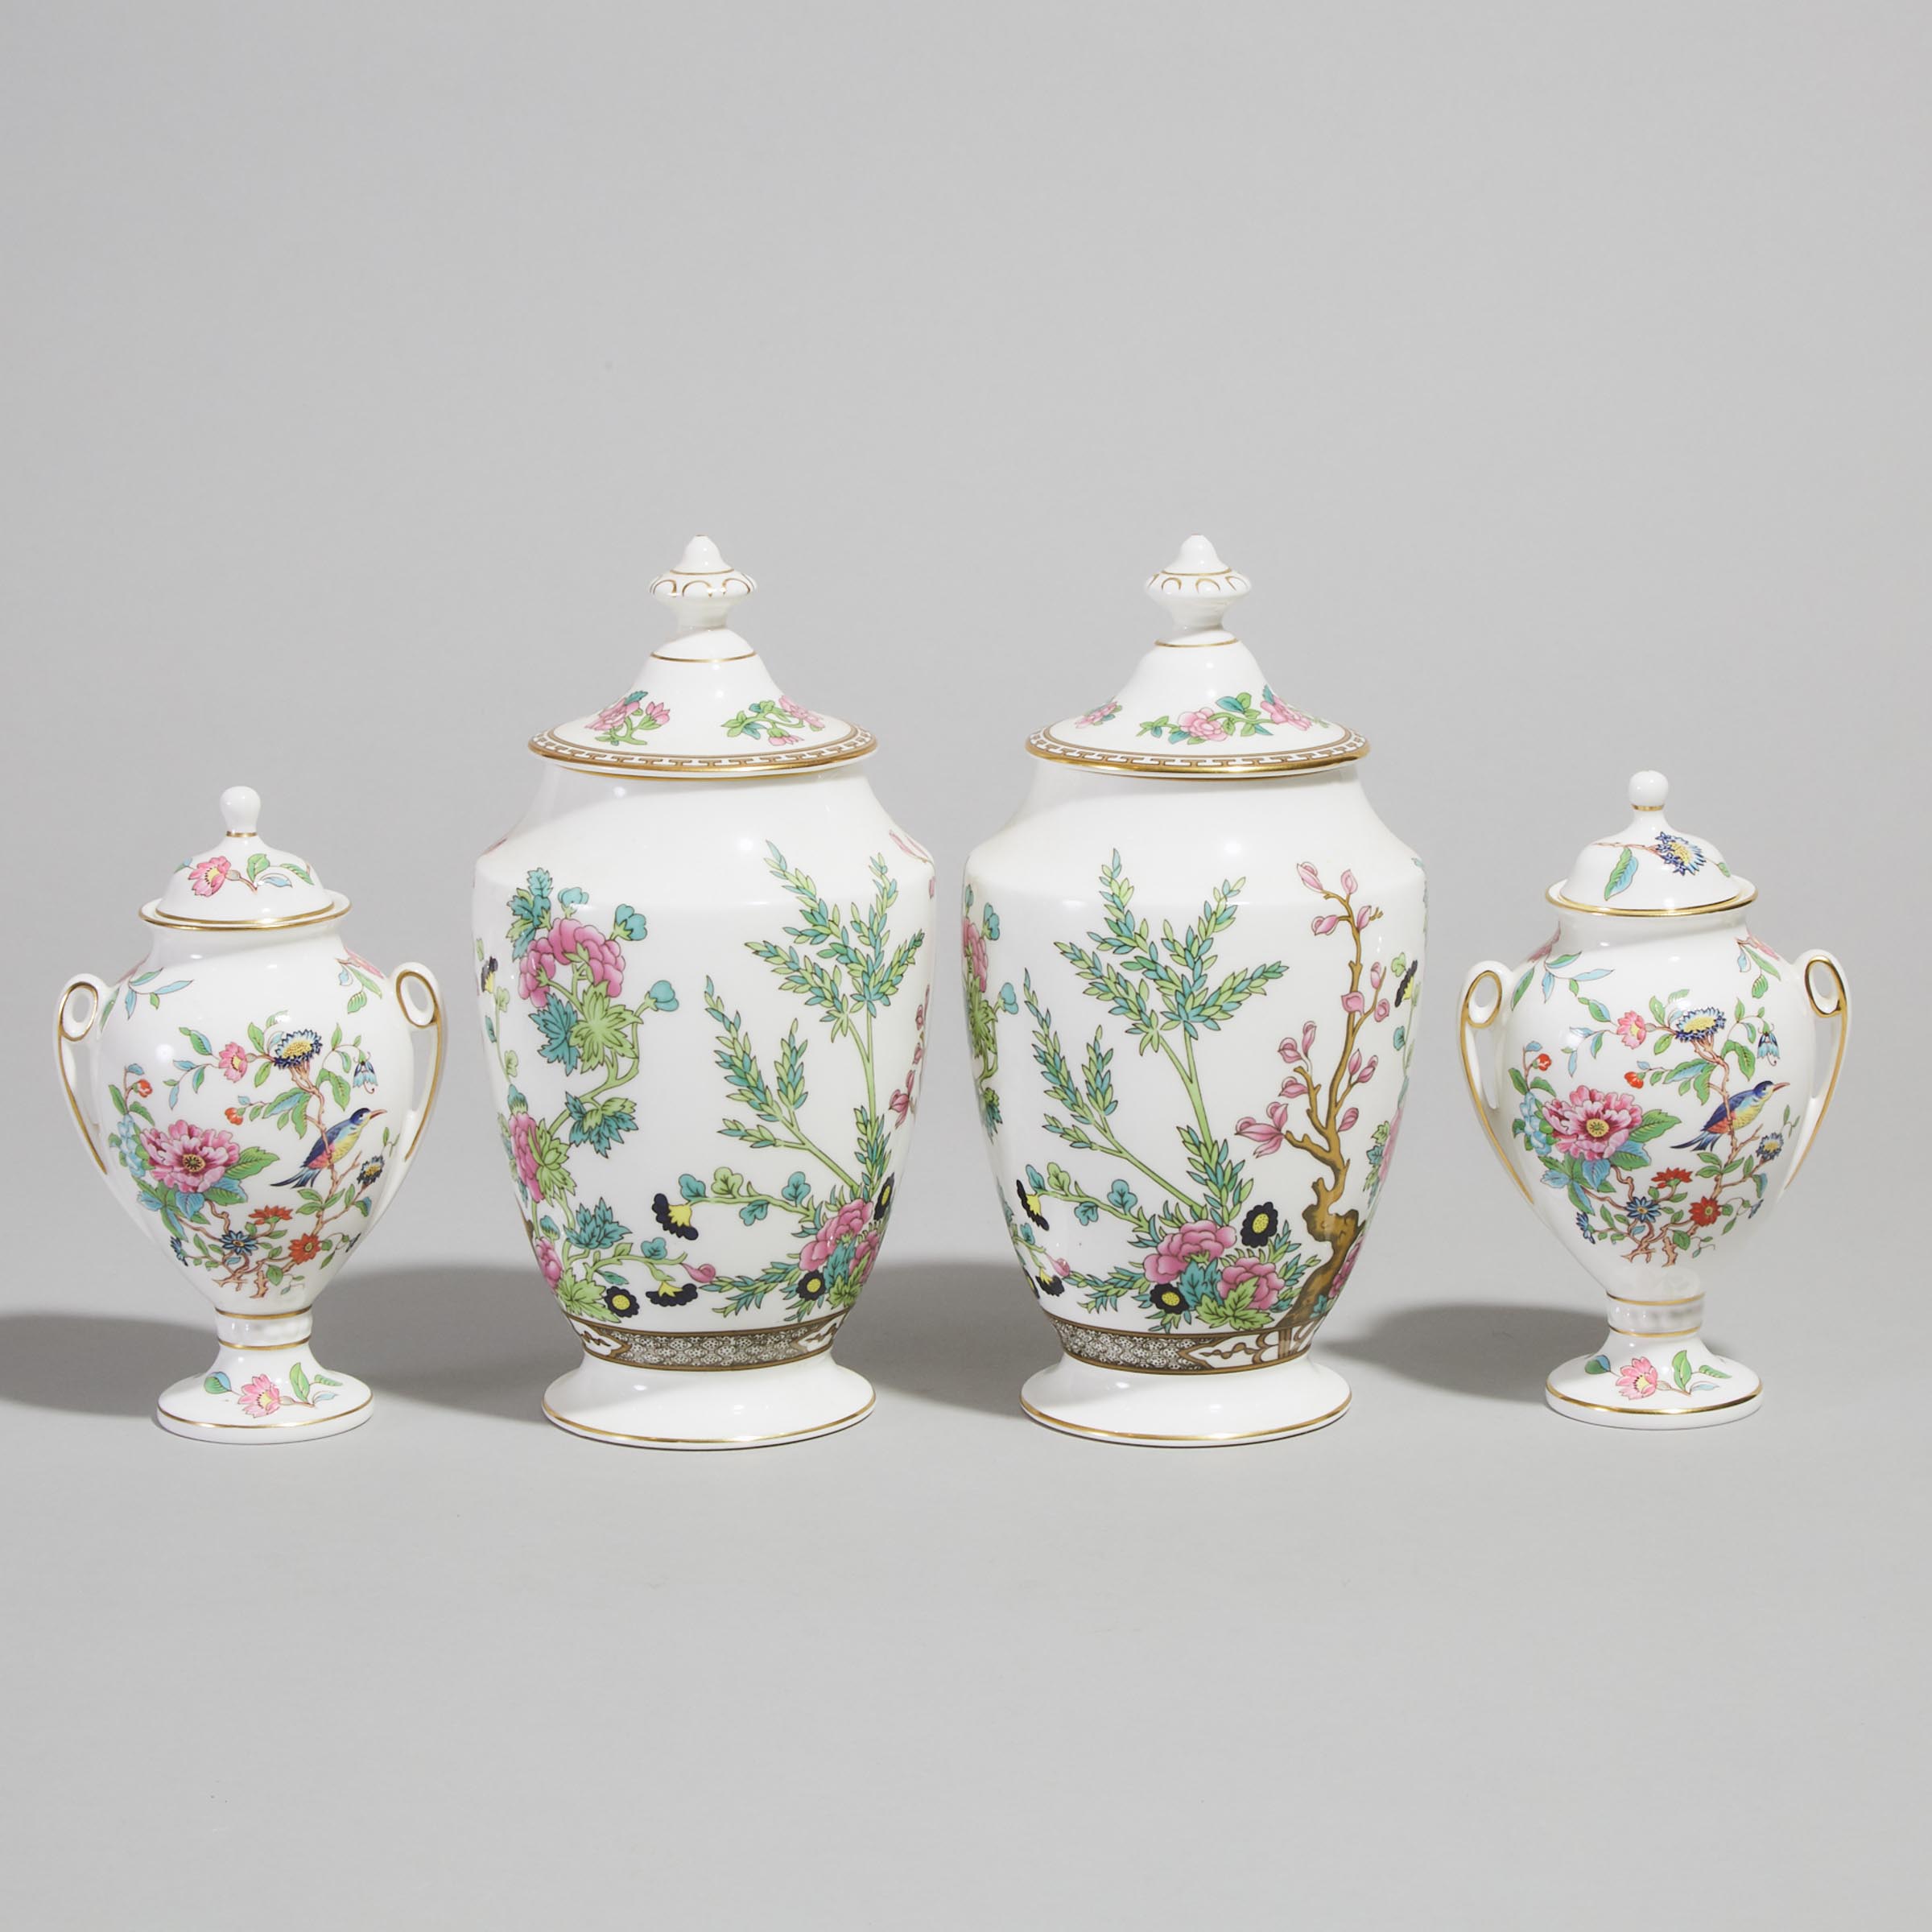 Pair of Coalport 'Indian Tree' Covered Vases and a Pair of Smaller Aynsley 'Pembroke' Pattern Two-Handled Vases with Covers, 20th century